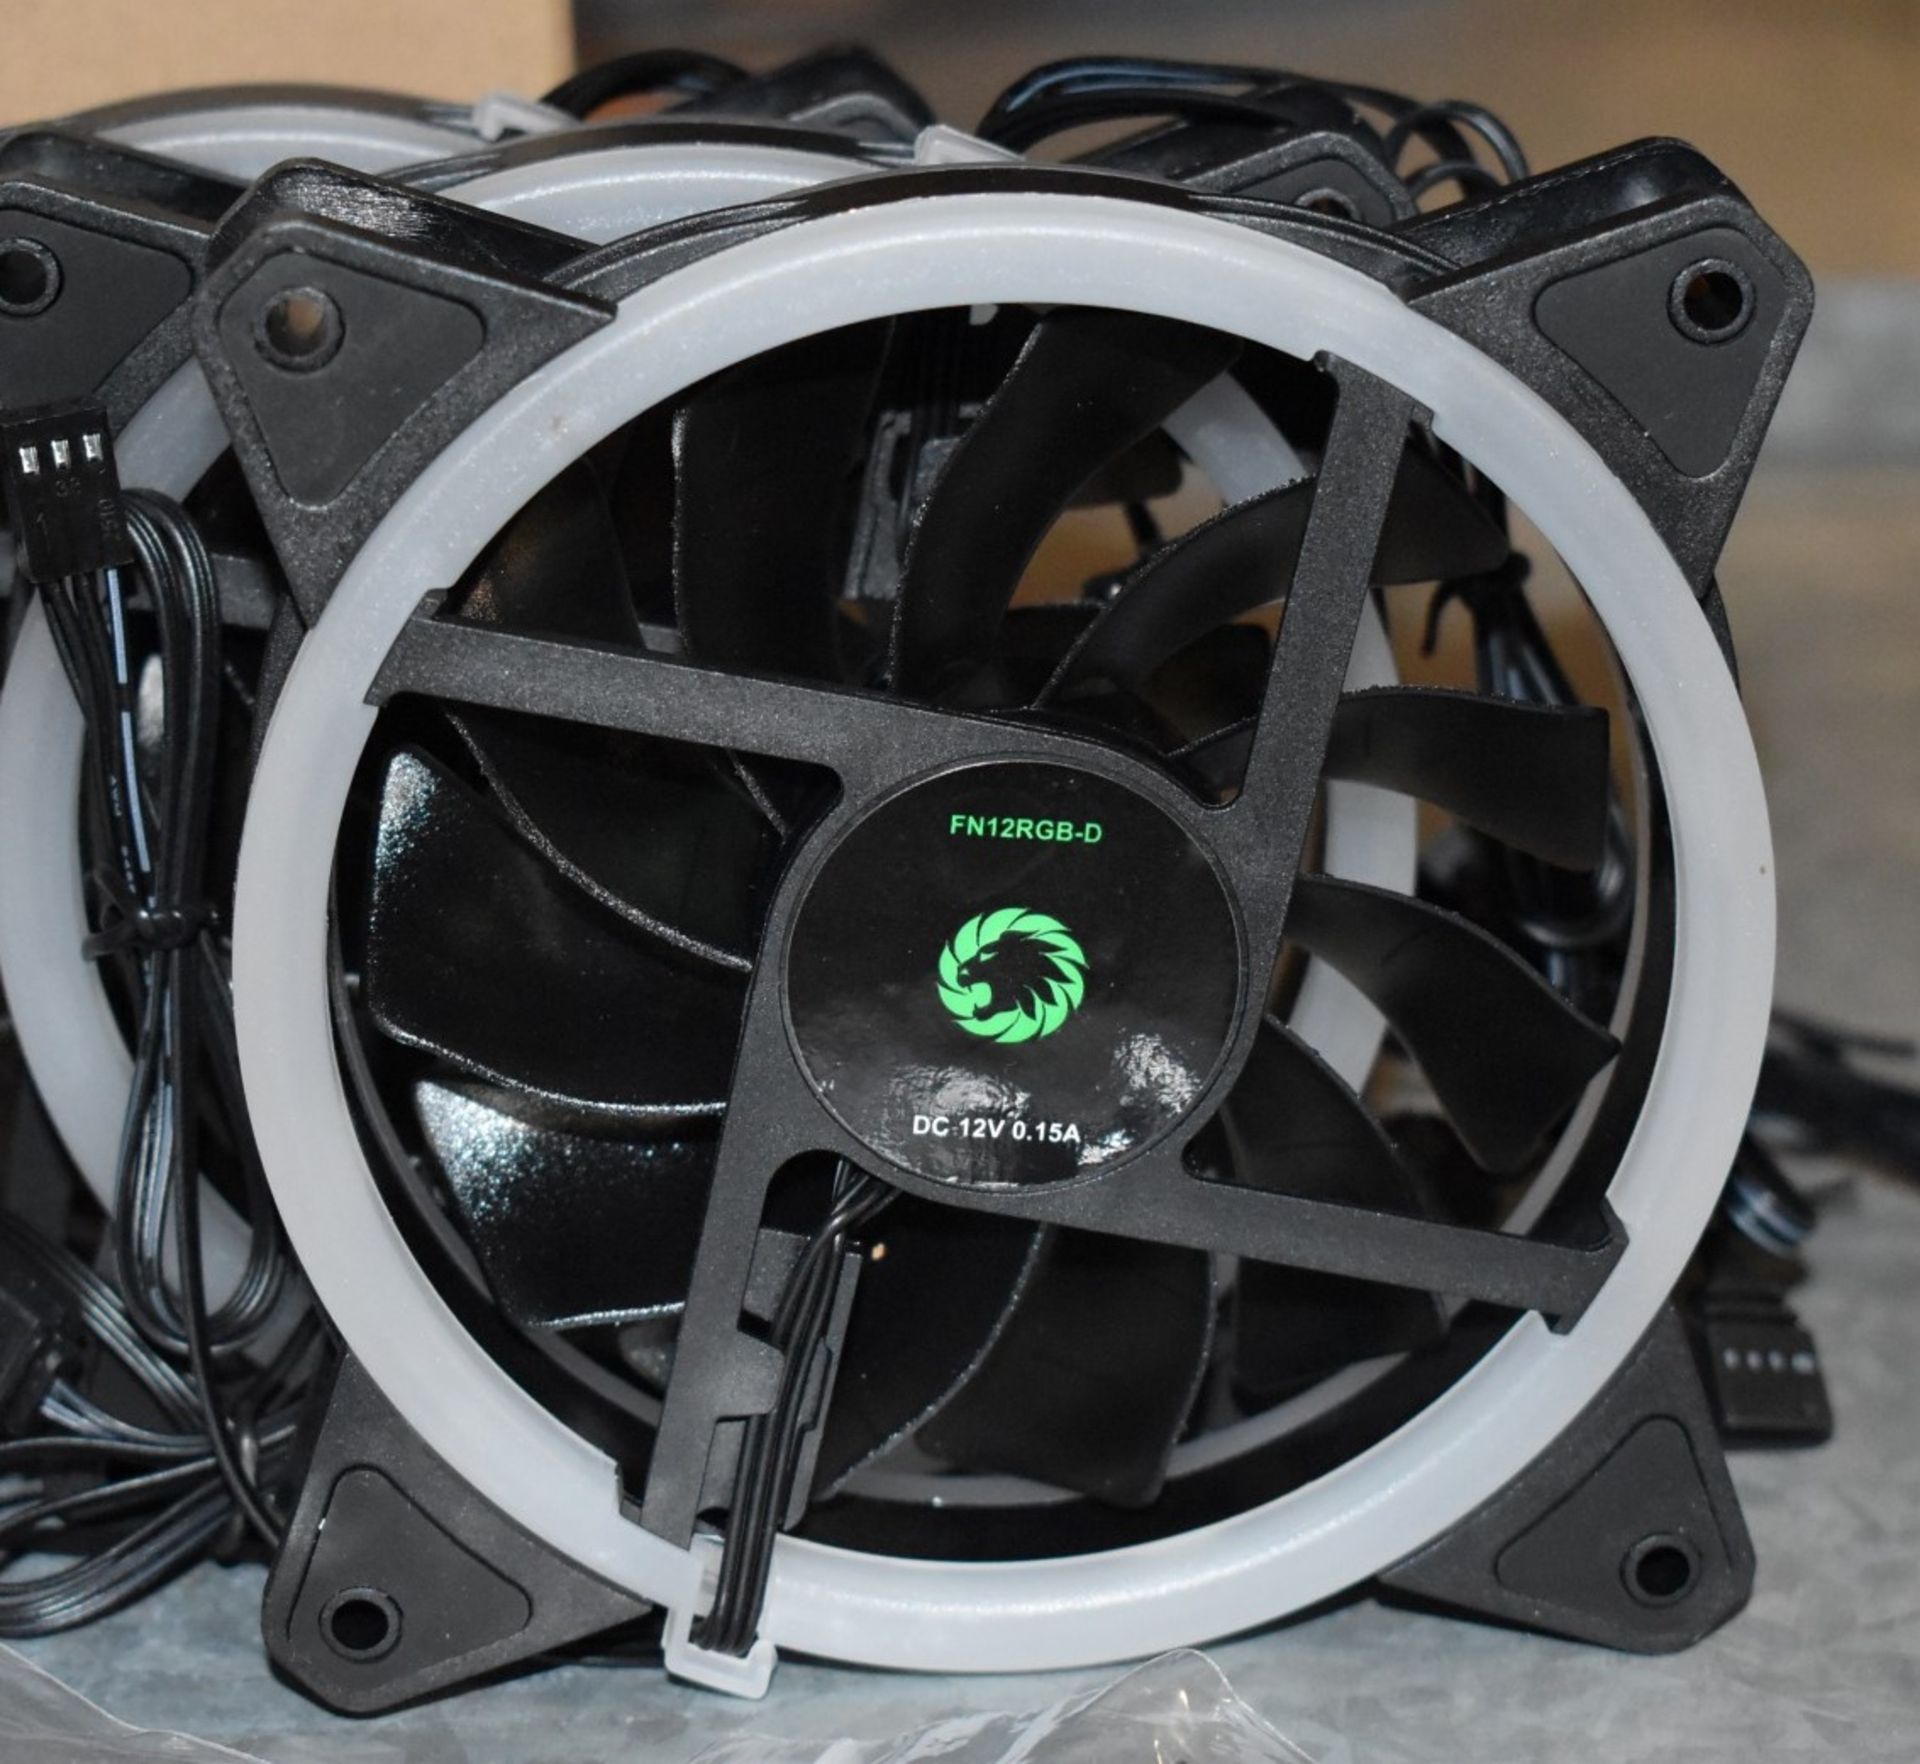 1 x GameMax LED Fan Pack For PC Gaming Cases - Includes 3 x 120mm LED Case Fans, Mounting Screws, - Image 3 of 8